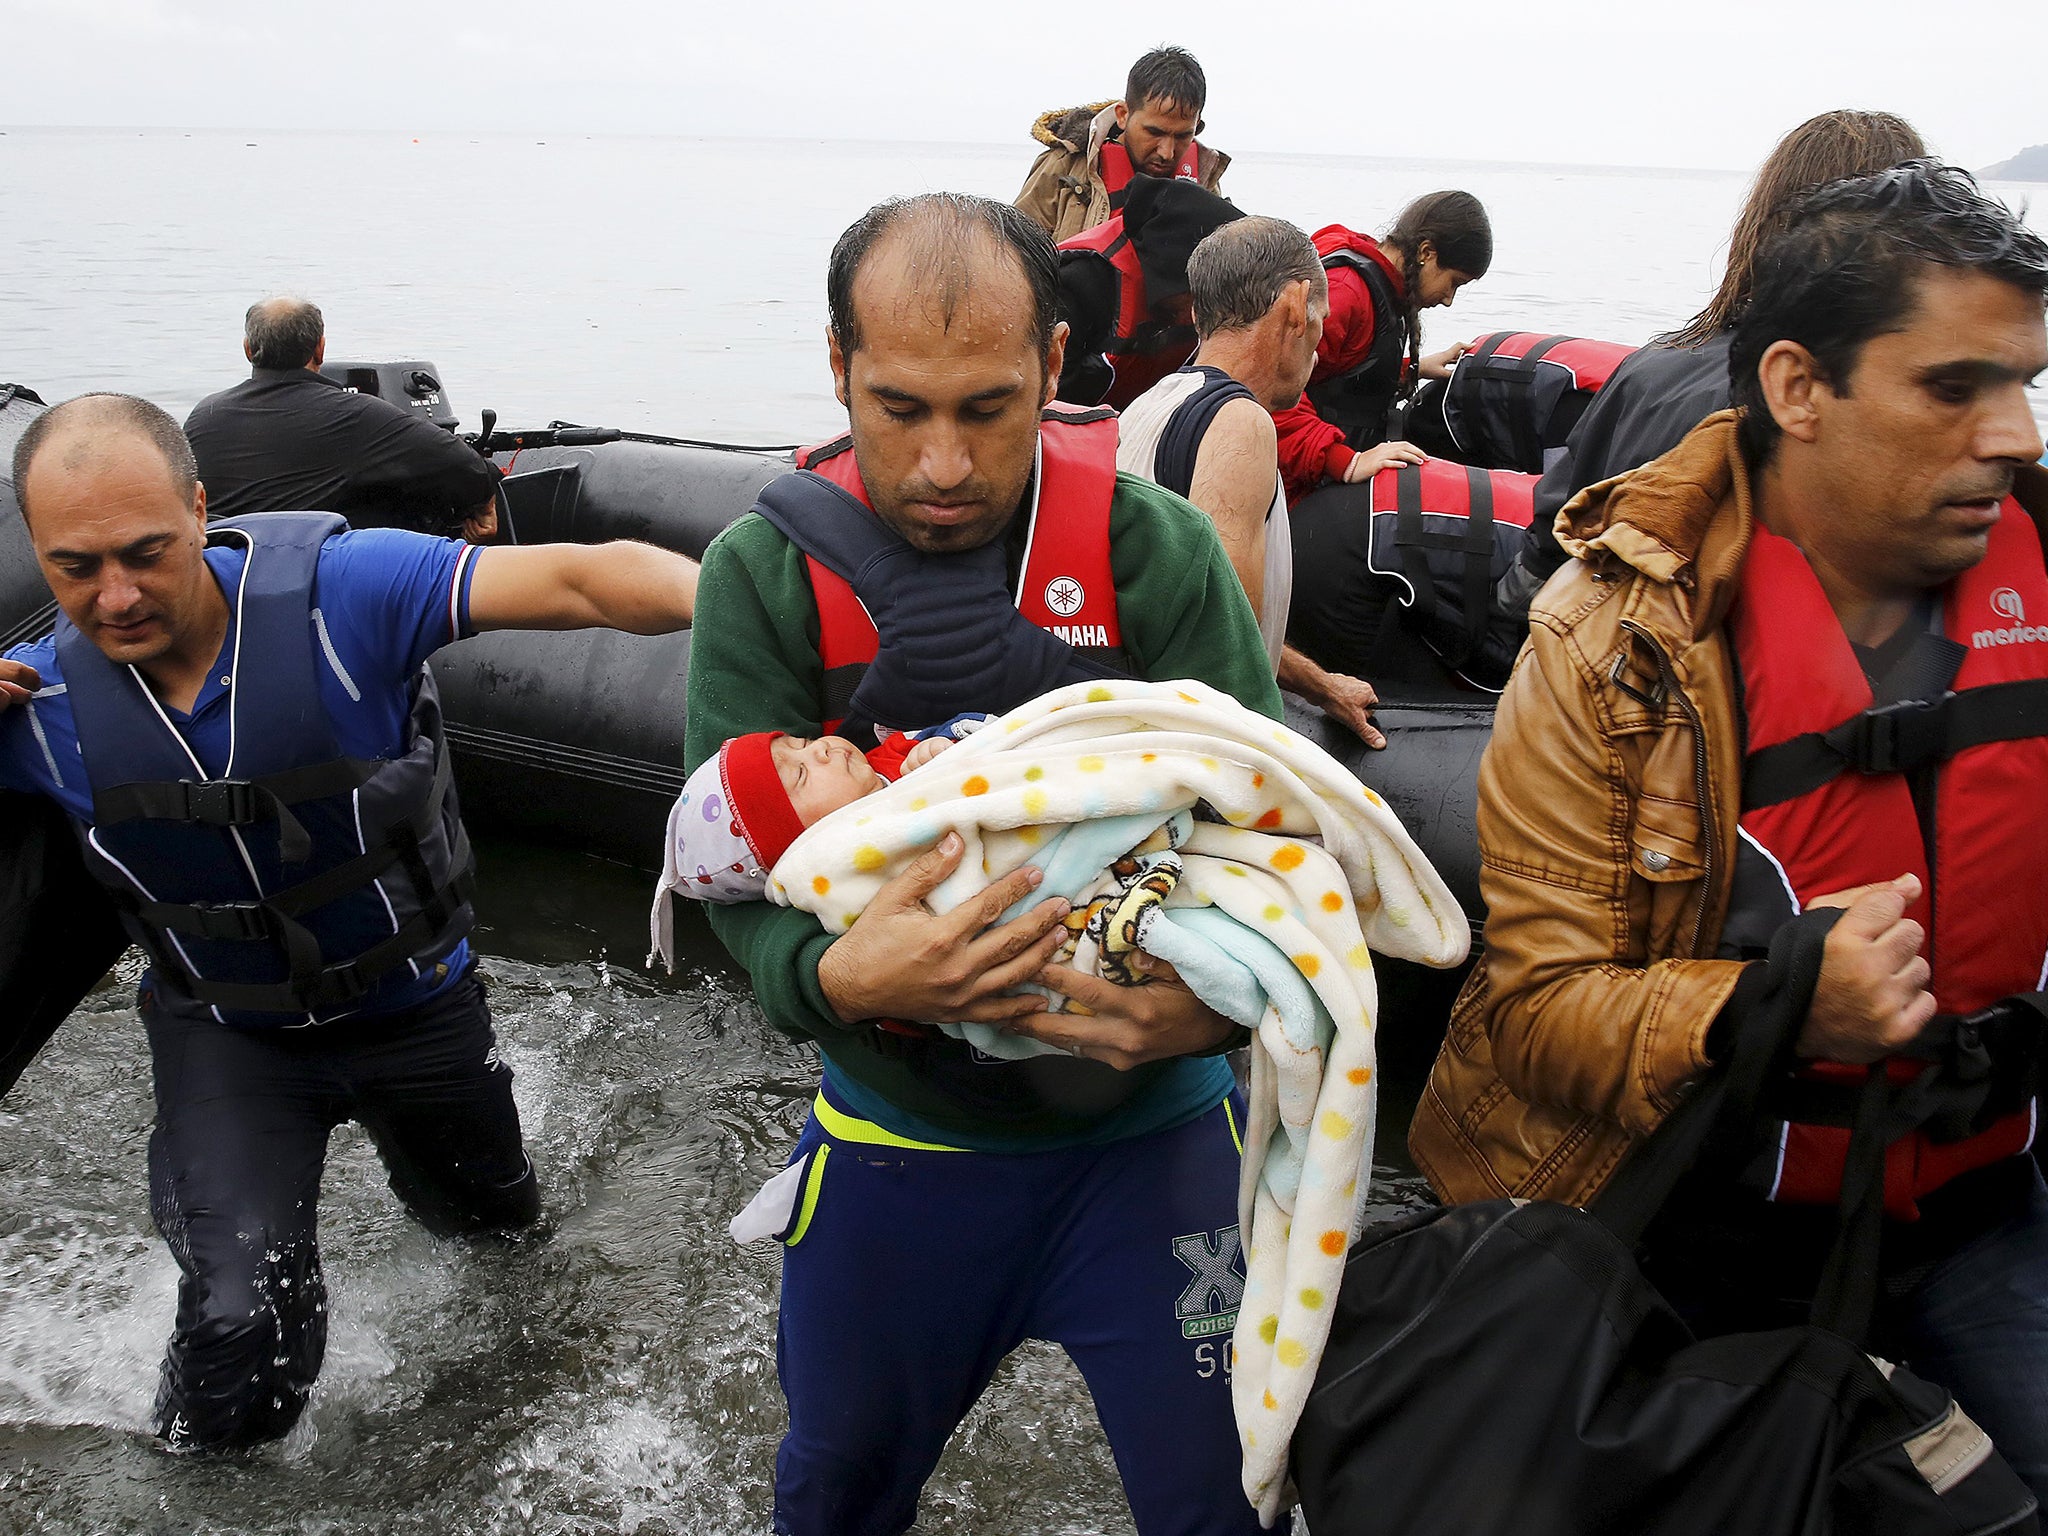 A Syrian refugee carries his baby off an overcrowded dinghy after crossing part of the Aegean Sea from Turkey to the Greek island of Lesbos